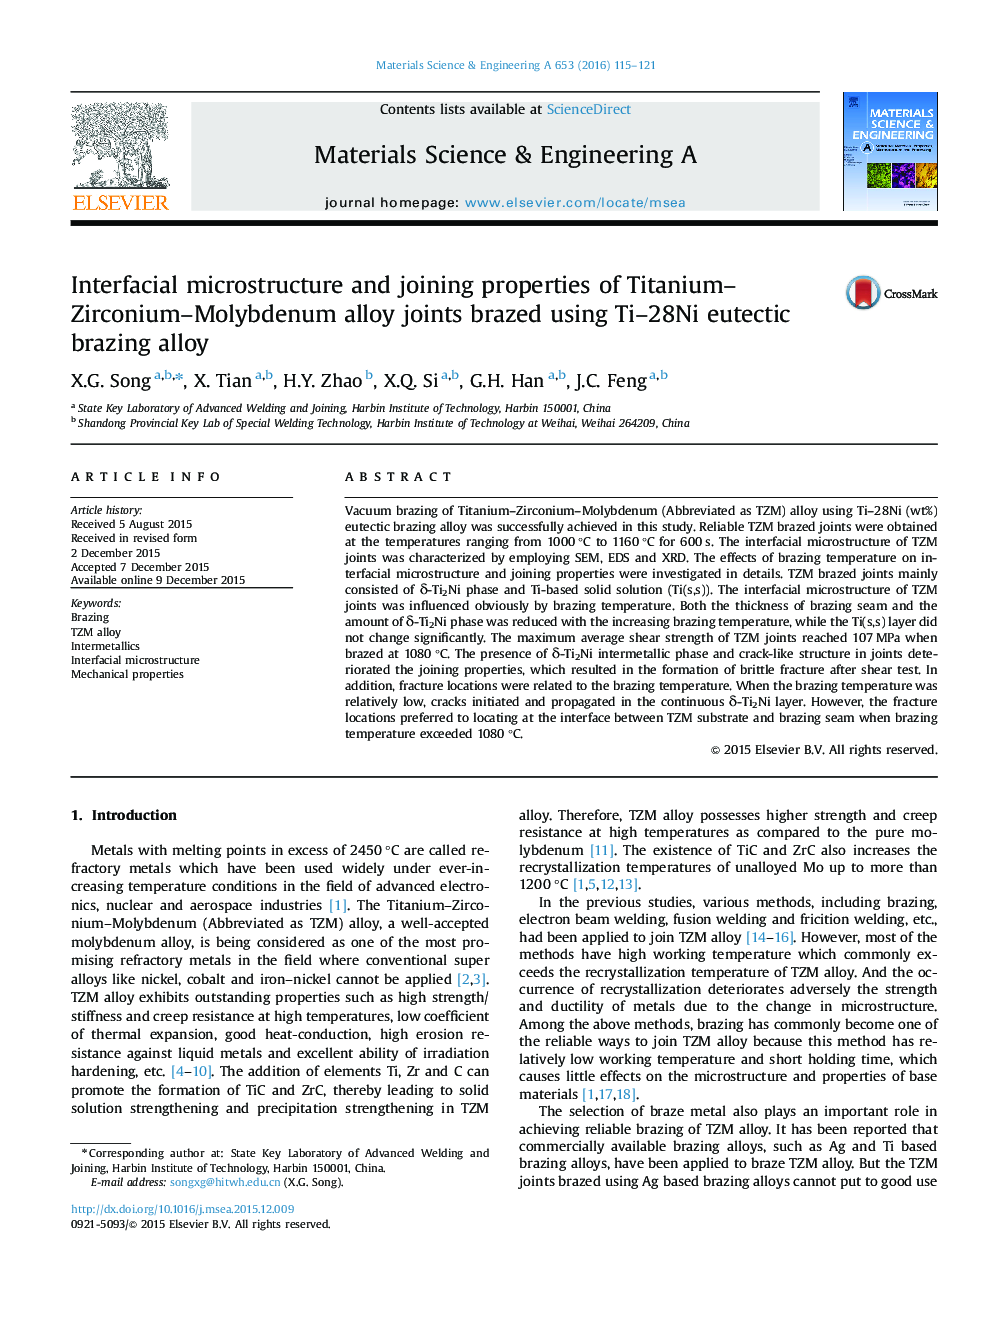 Interfacial microstructure and joining properties of Titanium-Zirconium-Molybdenum alloy joints brazed using Ti-28Ni eutectic brazing alloy